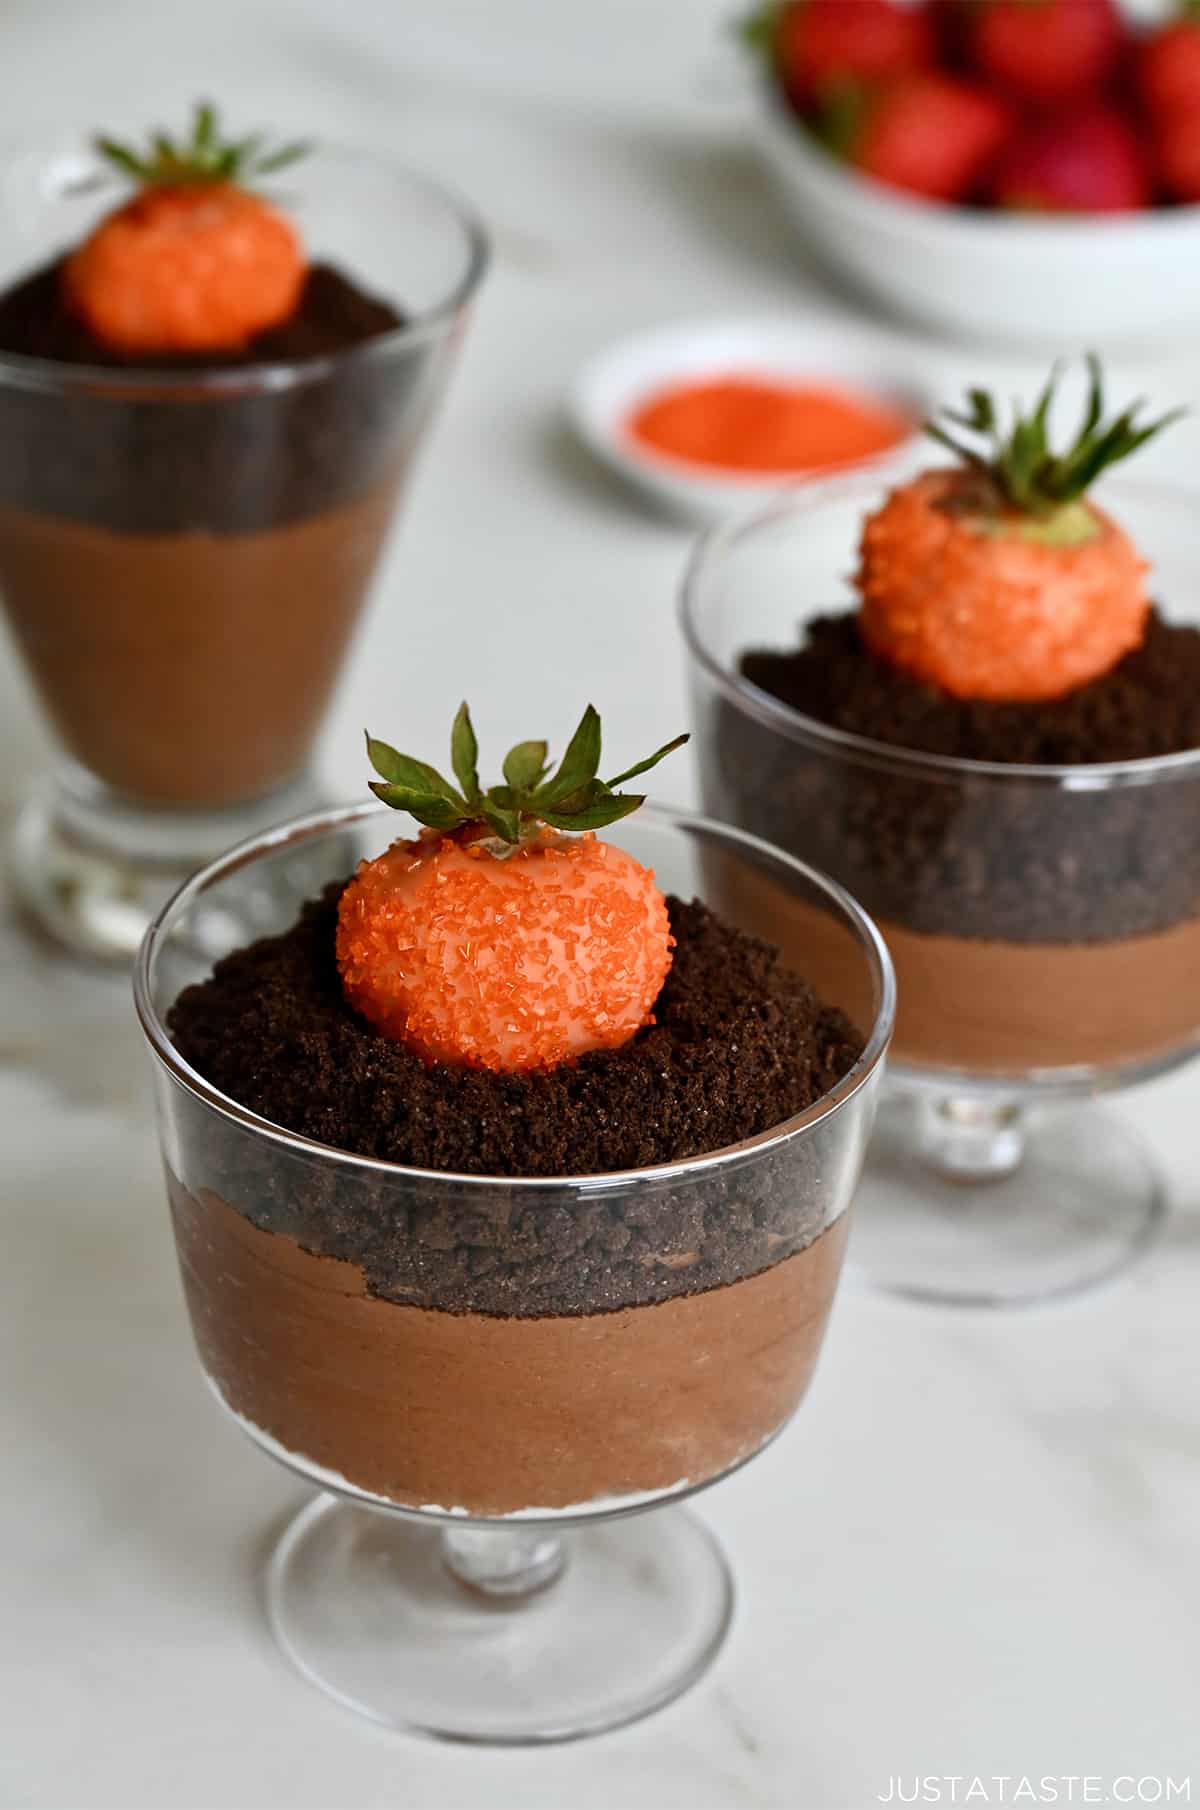 Three chocolate mousse parfaits topped with crushed chocolate wafers and strawberries dipped in orange candy melts. A bowl of strawberries sit behind the parfaits.